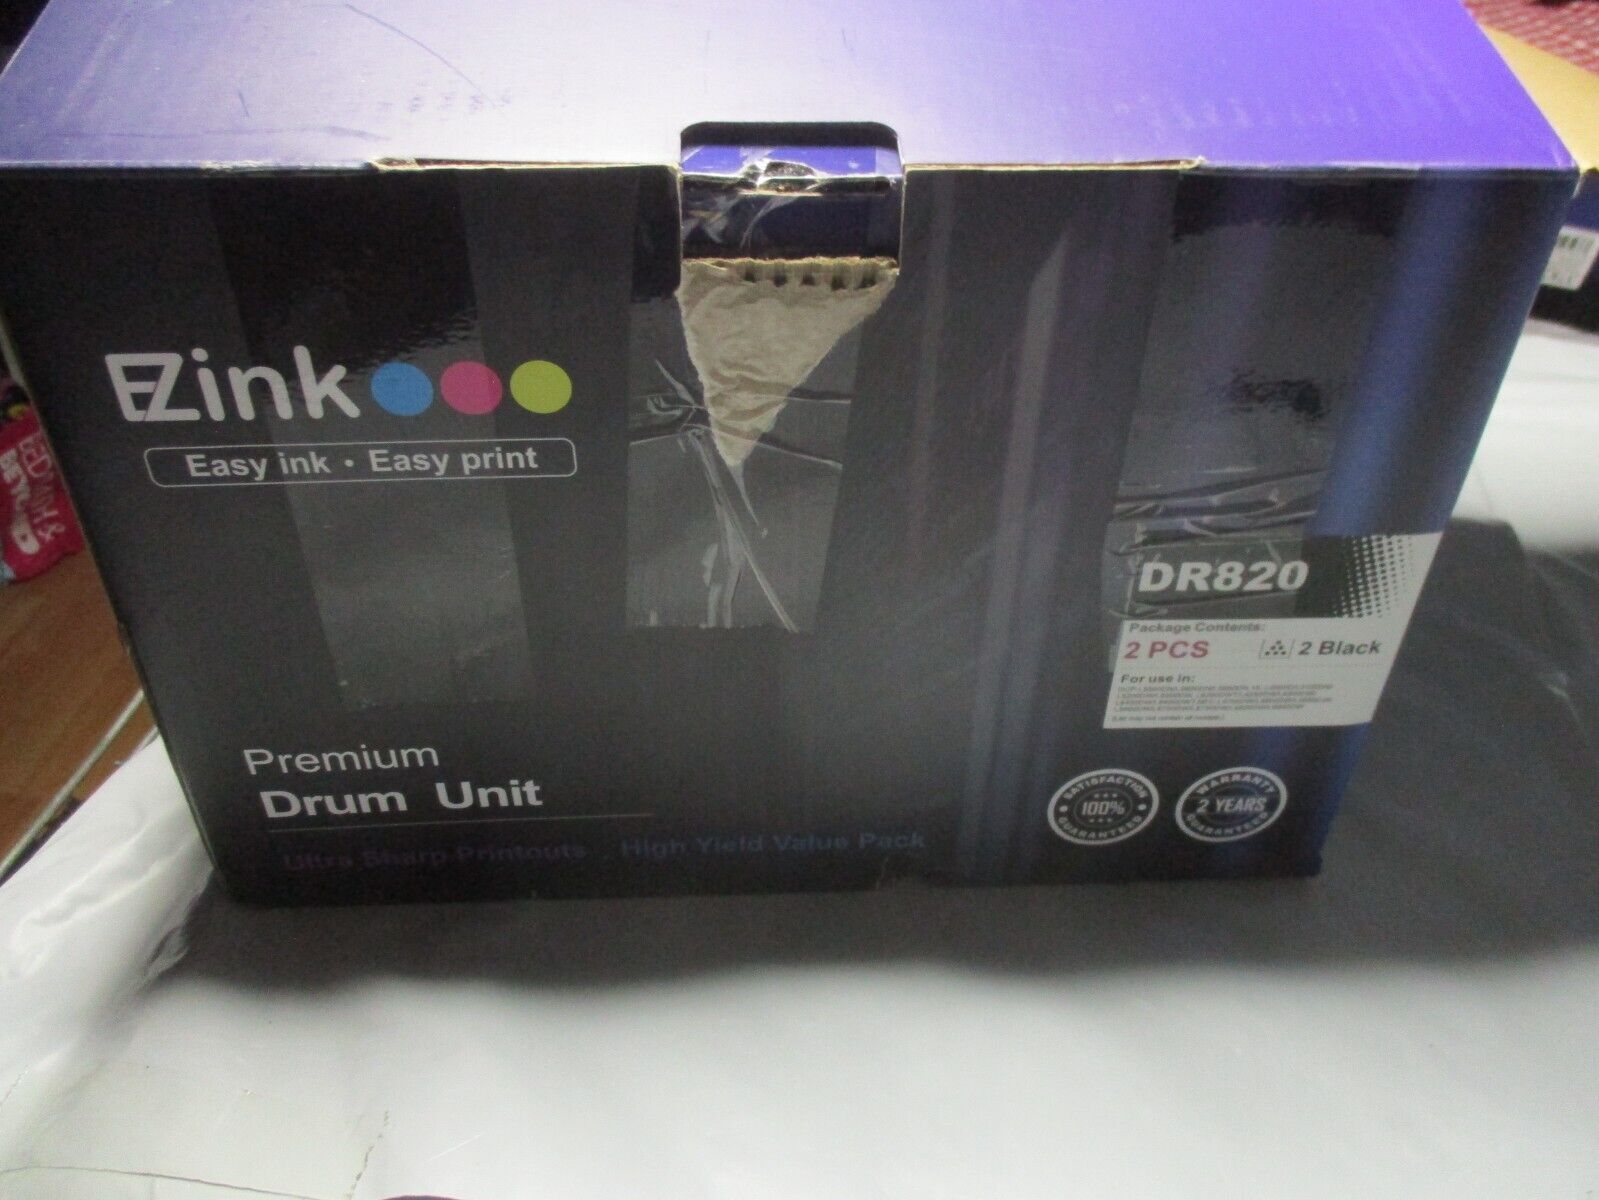 (2) PACK BLACK EZINK DR820 DRUM UNIT  NEW- OPEN BOX - SEALED IN PLASTIC-SEE PICS